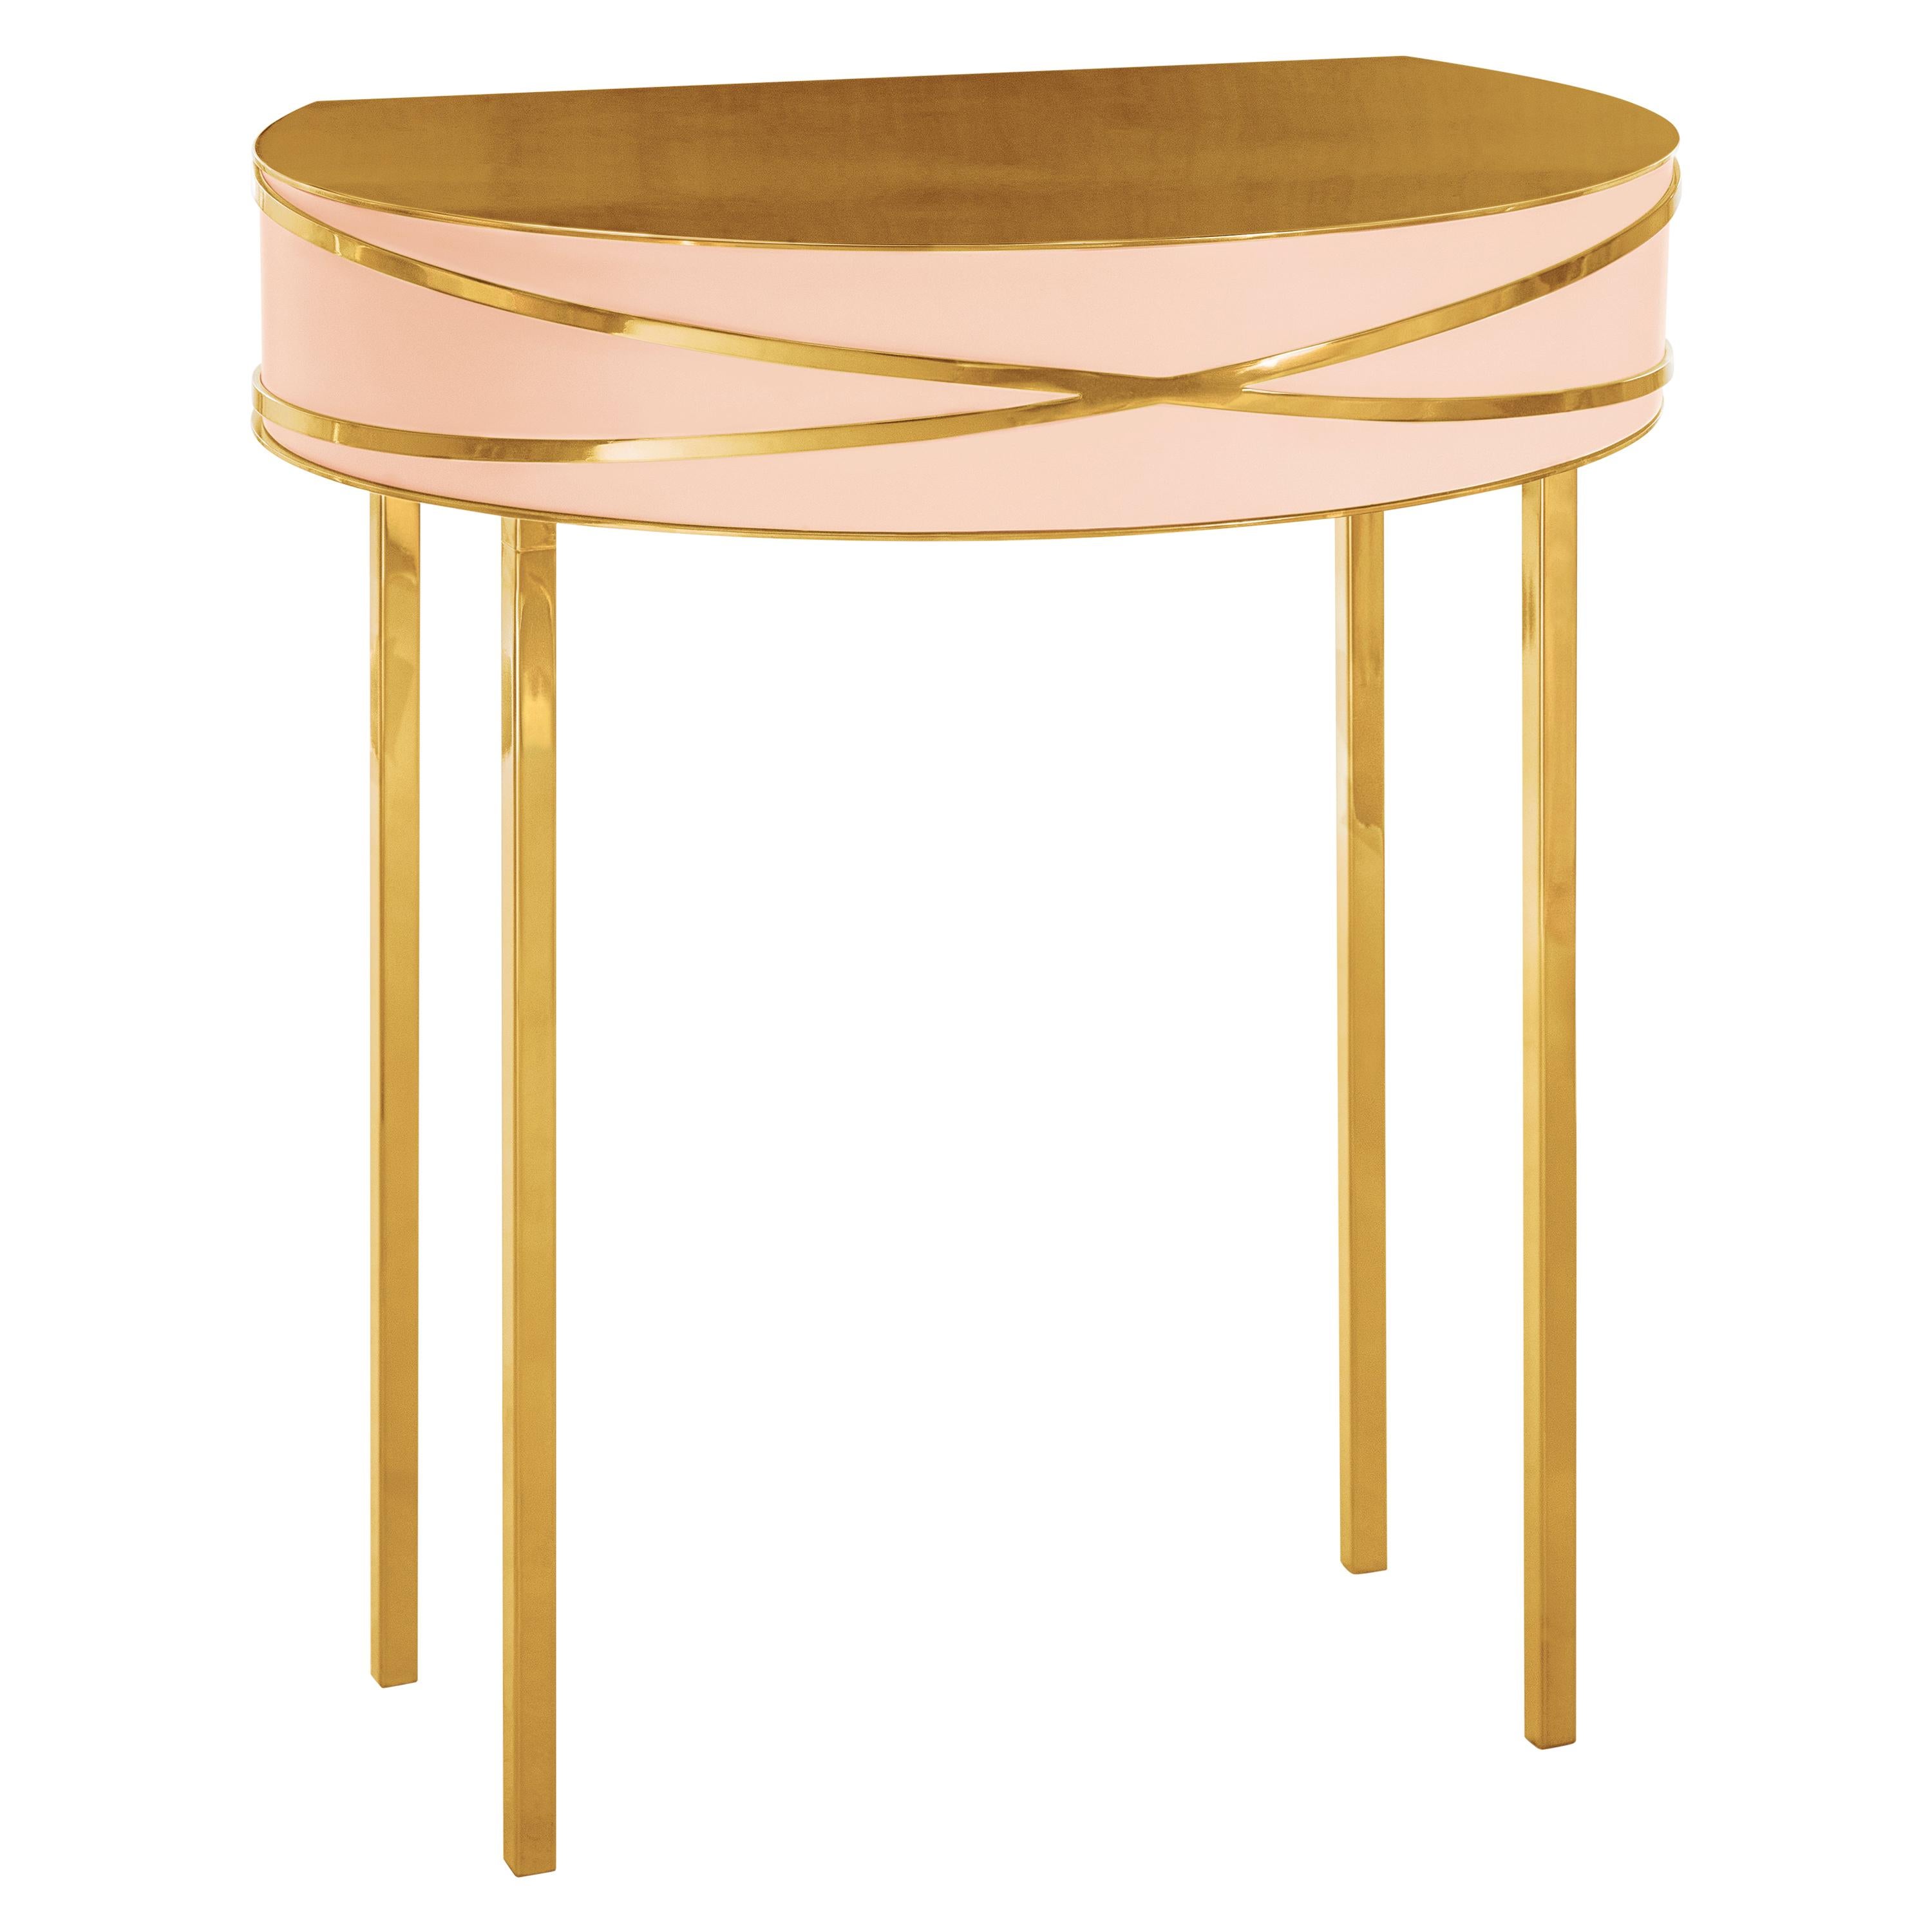 Stella Pink Console or Bedside Table with Gold Trims by Nika Zupanc